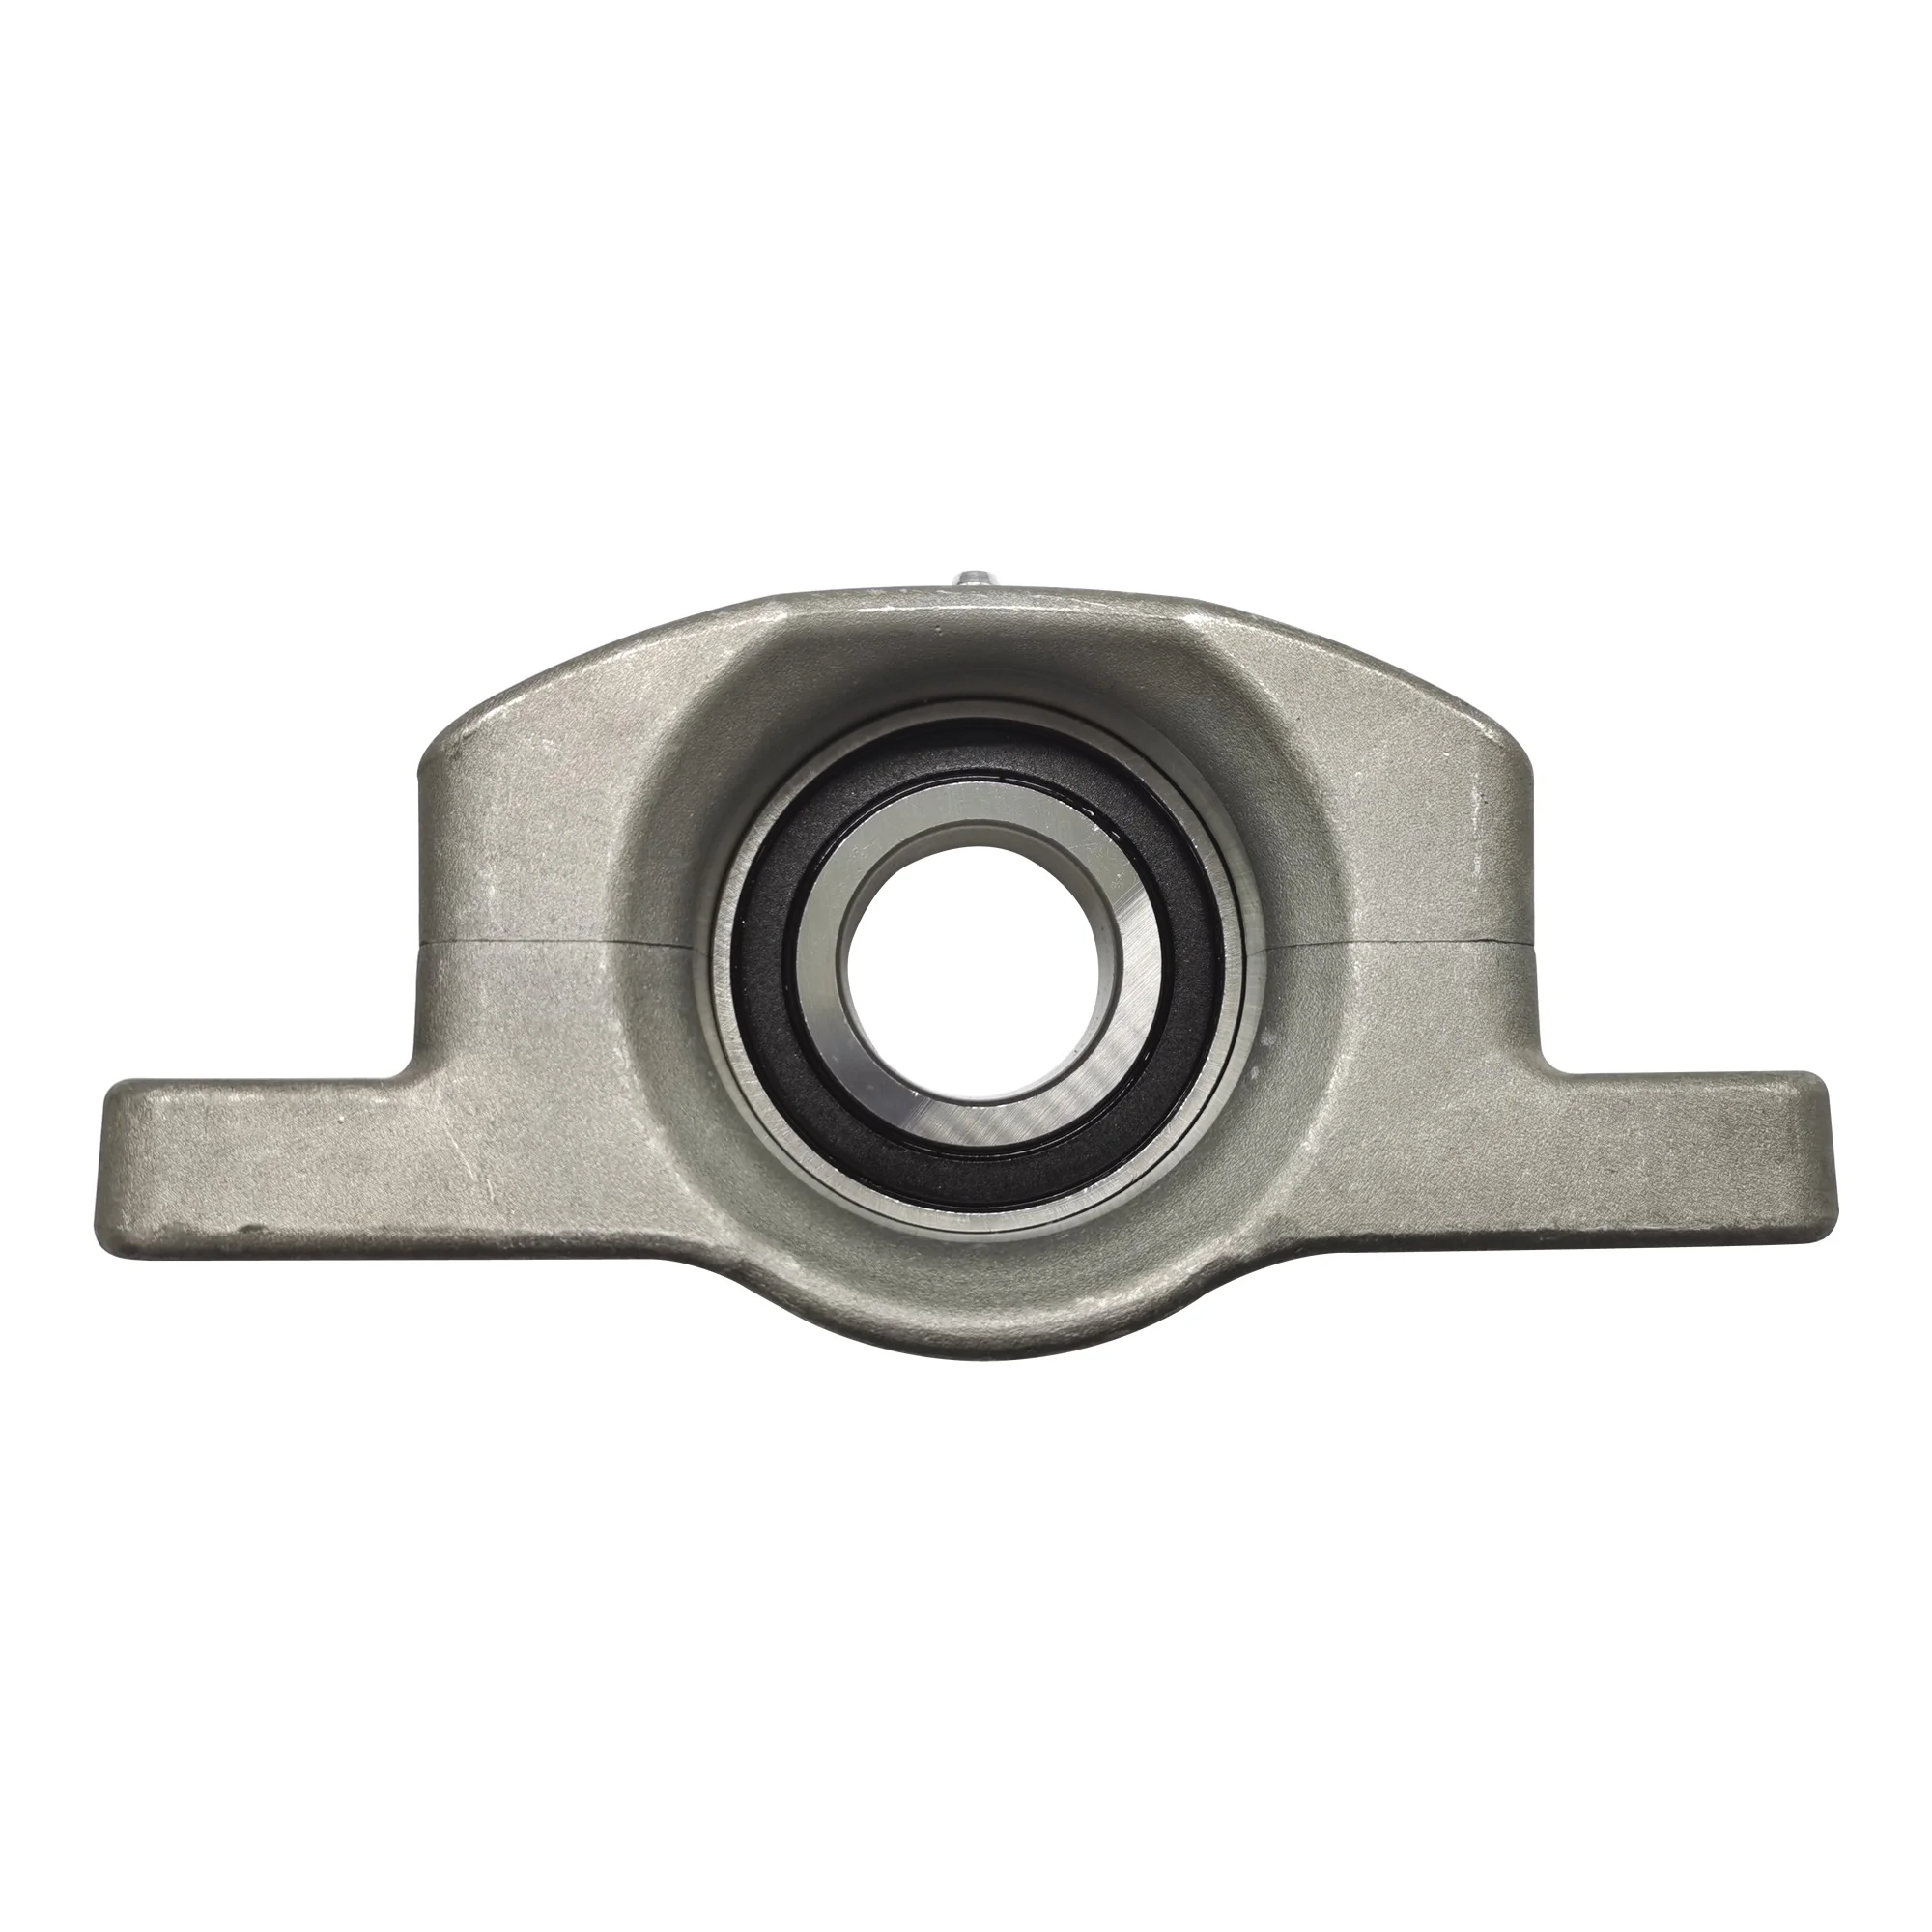 Driveshaft Carrier Bearing for Polaris RZR XP 4 1000 Polaris S 900 1000 2014-2020 Greaseable and Self Aligning, Only One